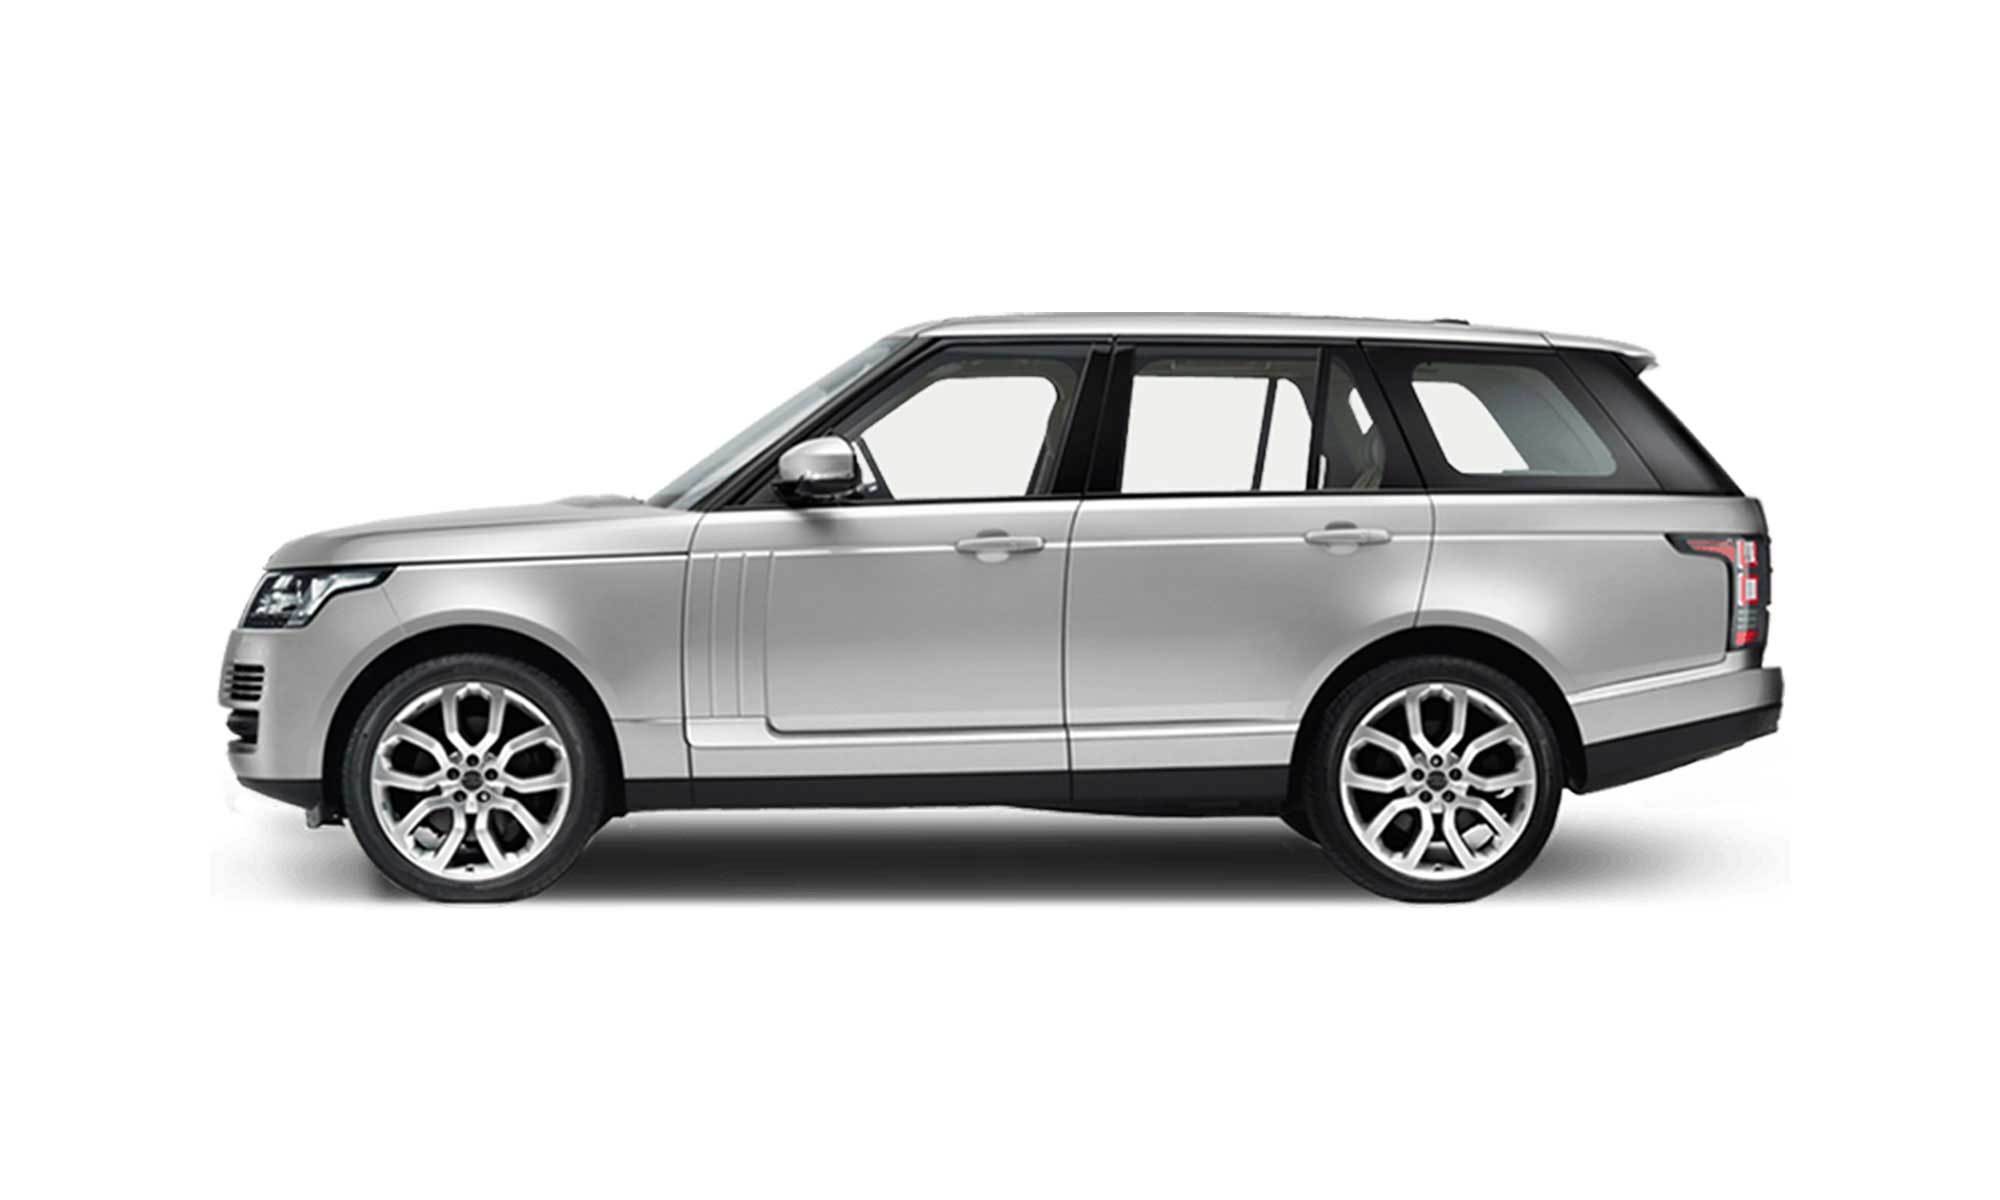 Range Rover Phev Cost  - And In The Rare World Of Luxury Phev Suvs, The 2019 Range Rover Sport Phev Is The Rarest Of The All, Because You Can�t Buy One Yet.